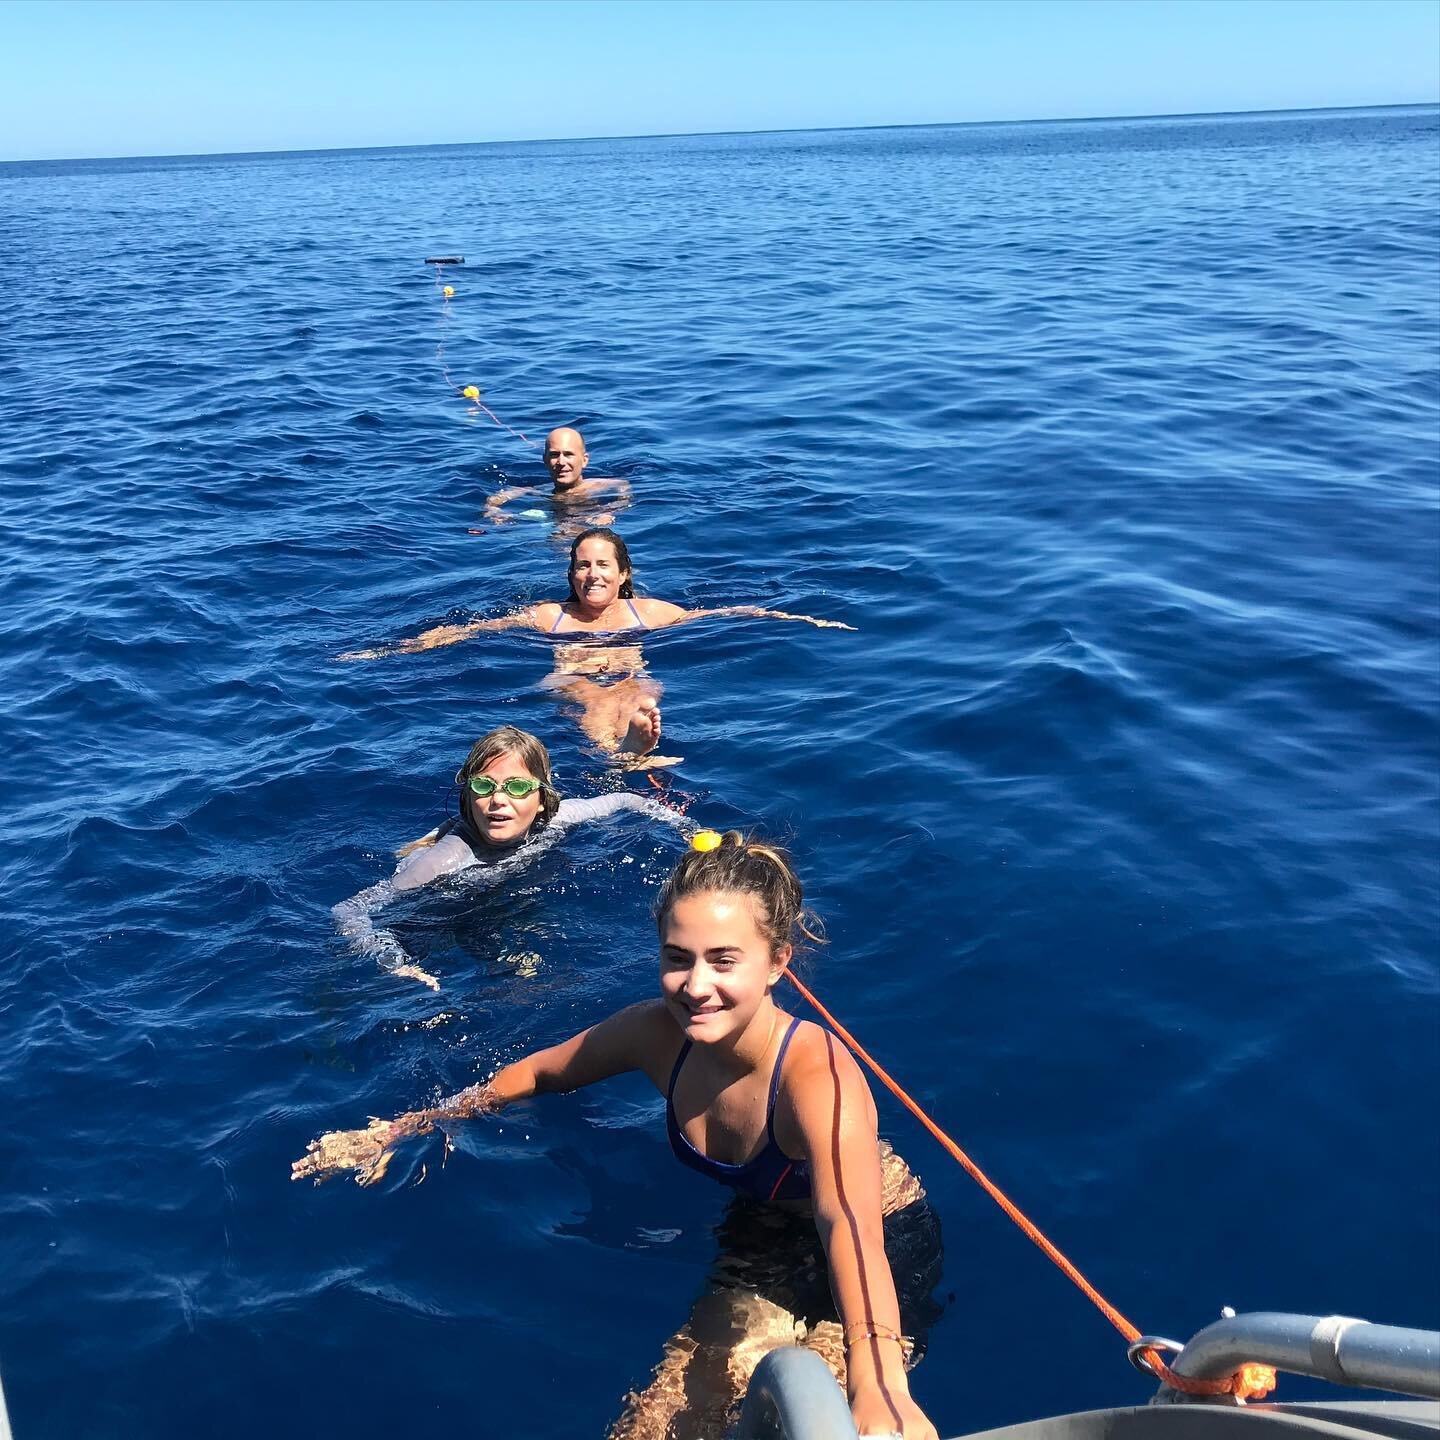 We swam in the middle of the Atlantic Ocean! Nothing but 18,000 feet of water below us. It&rsquo;s an exhilarating experience for sure! #swim #openocean #atlantic #blue #sailing #bermuda2azores #kids4sail #kids4sailteen